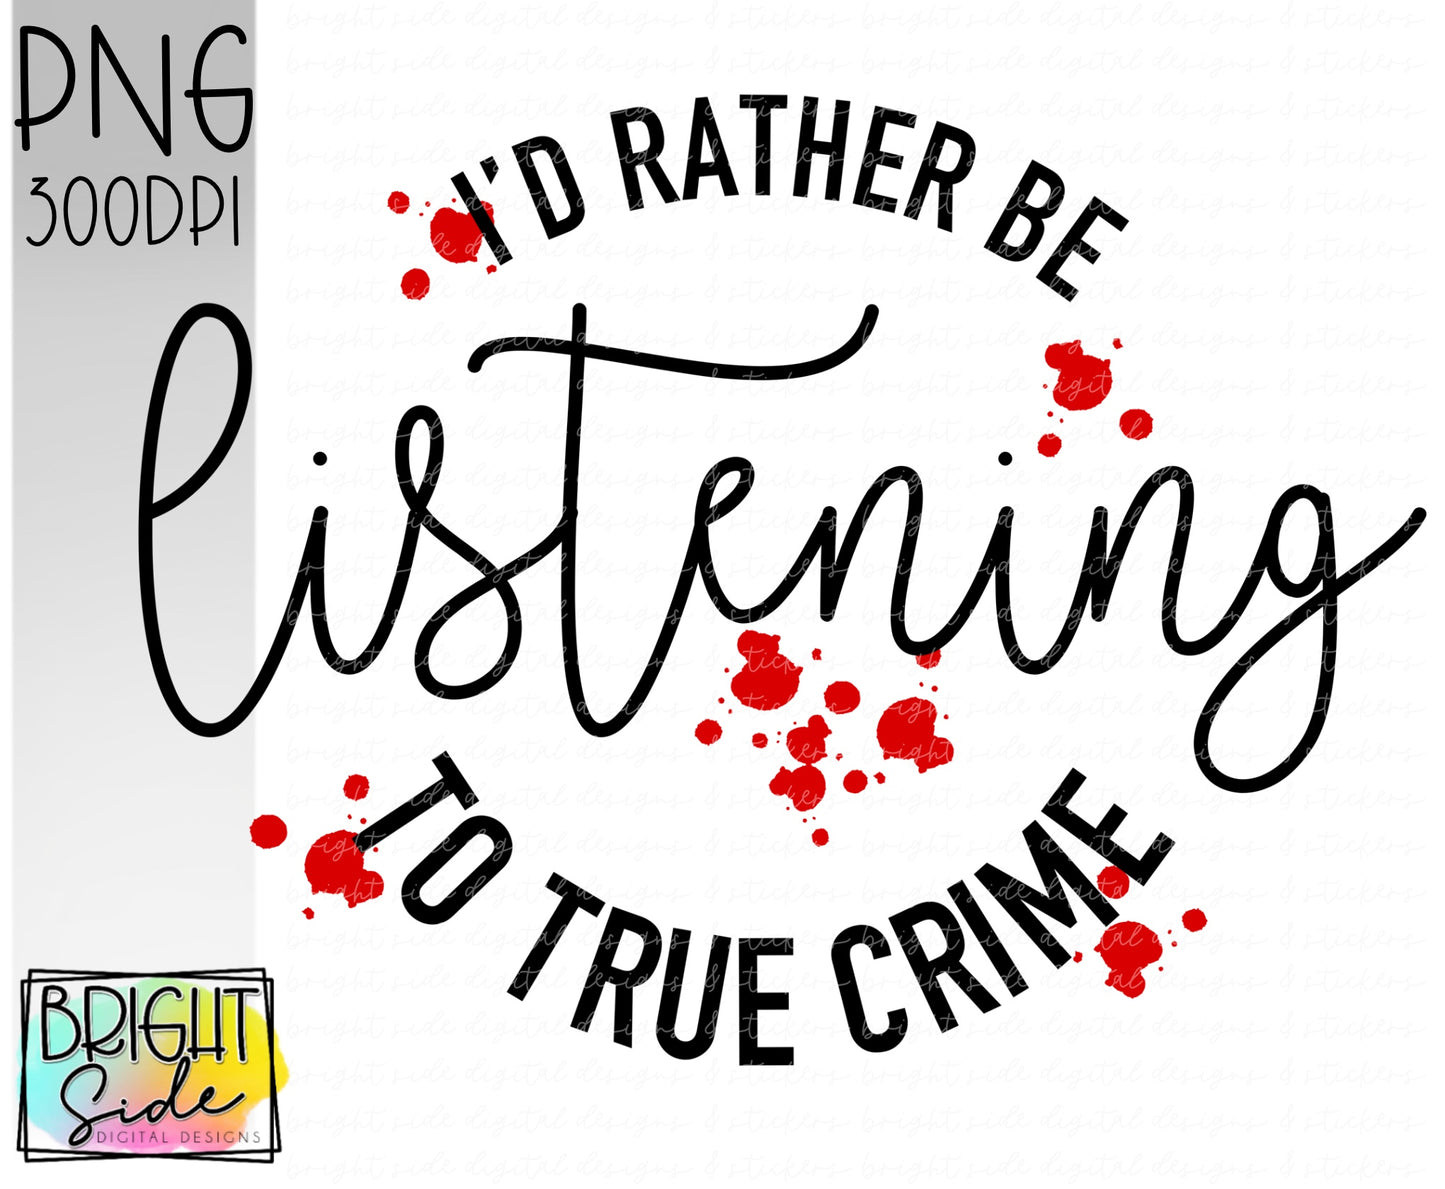 I’d rather be listening to true crime